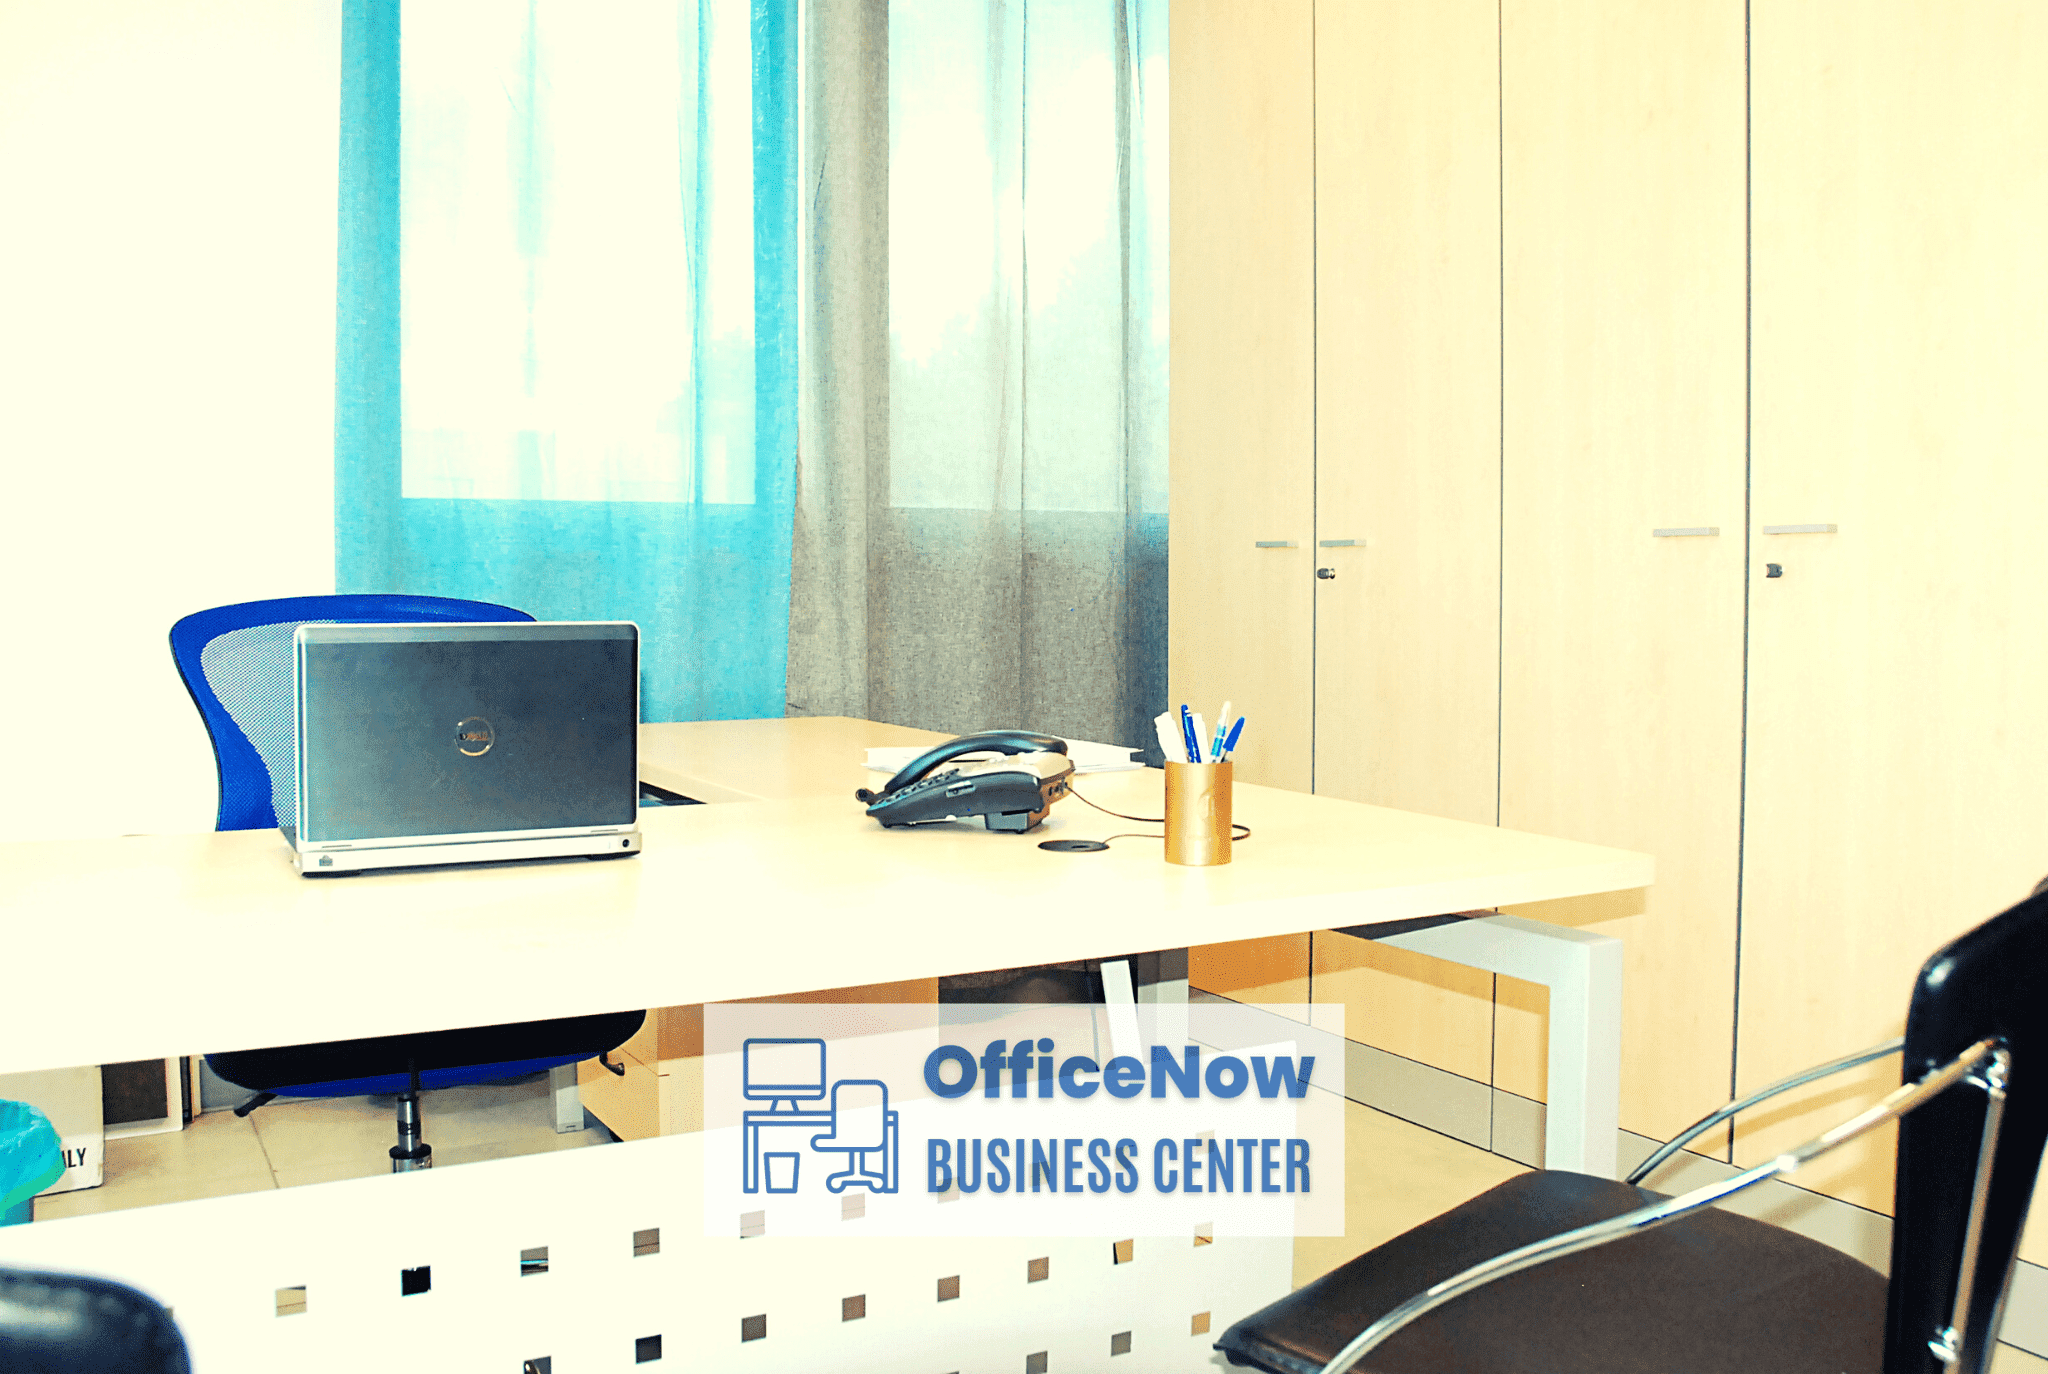 OfficeNow, office for rent in Gallarate, office in Cairate Varese 4 workstations